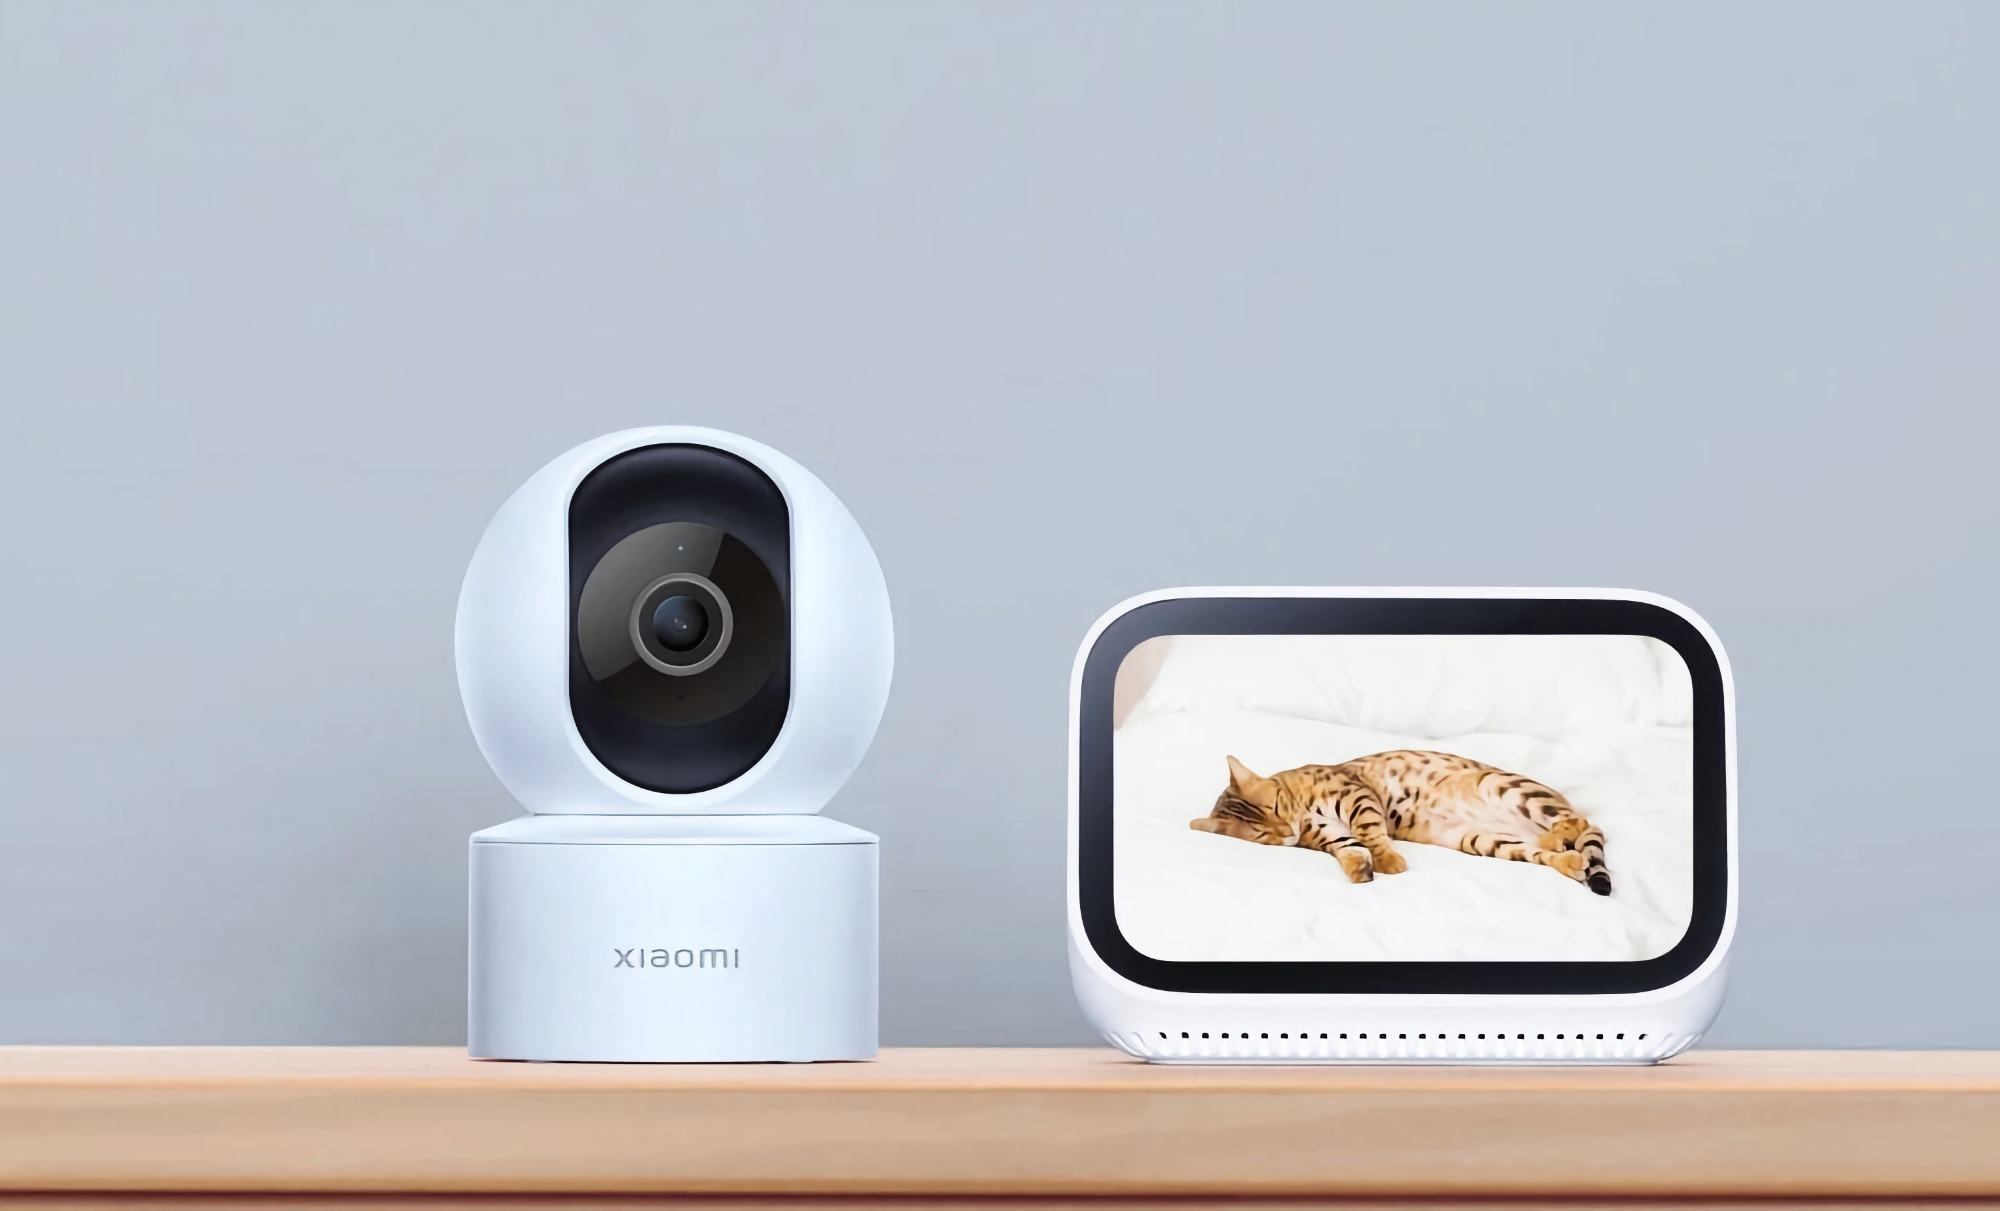 Xiaomi introduced in Europe Smart Camera C200 with 360-degree view, as well as support for Amazon Alexa and Google Home